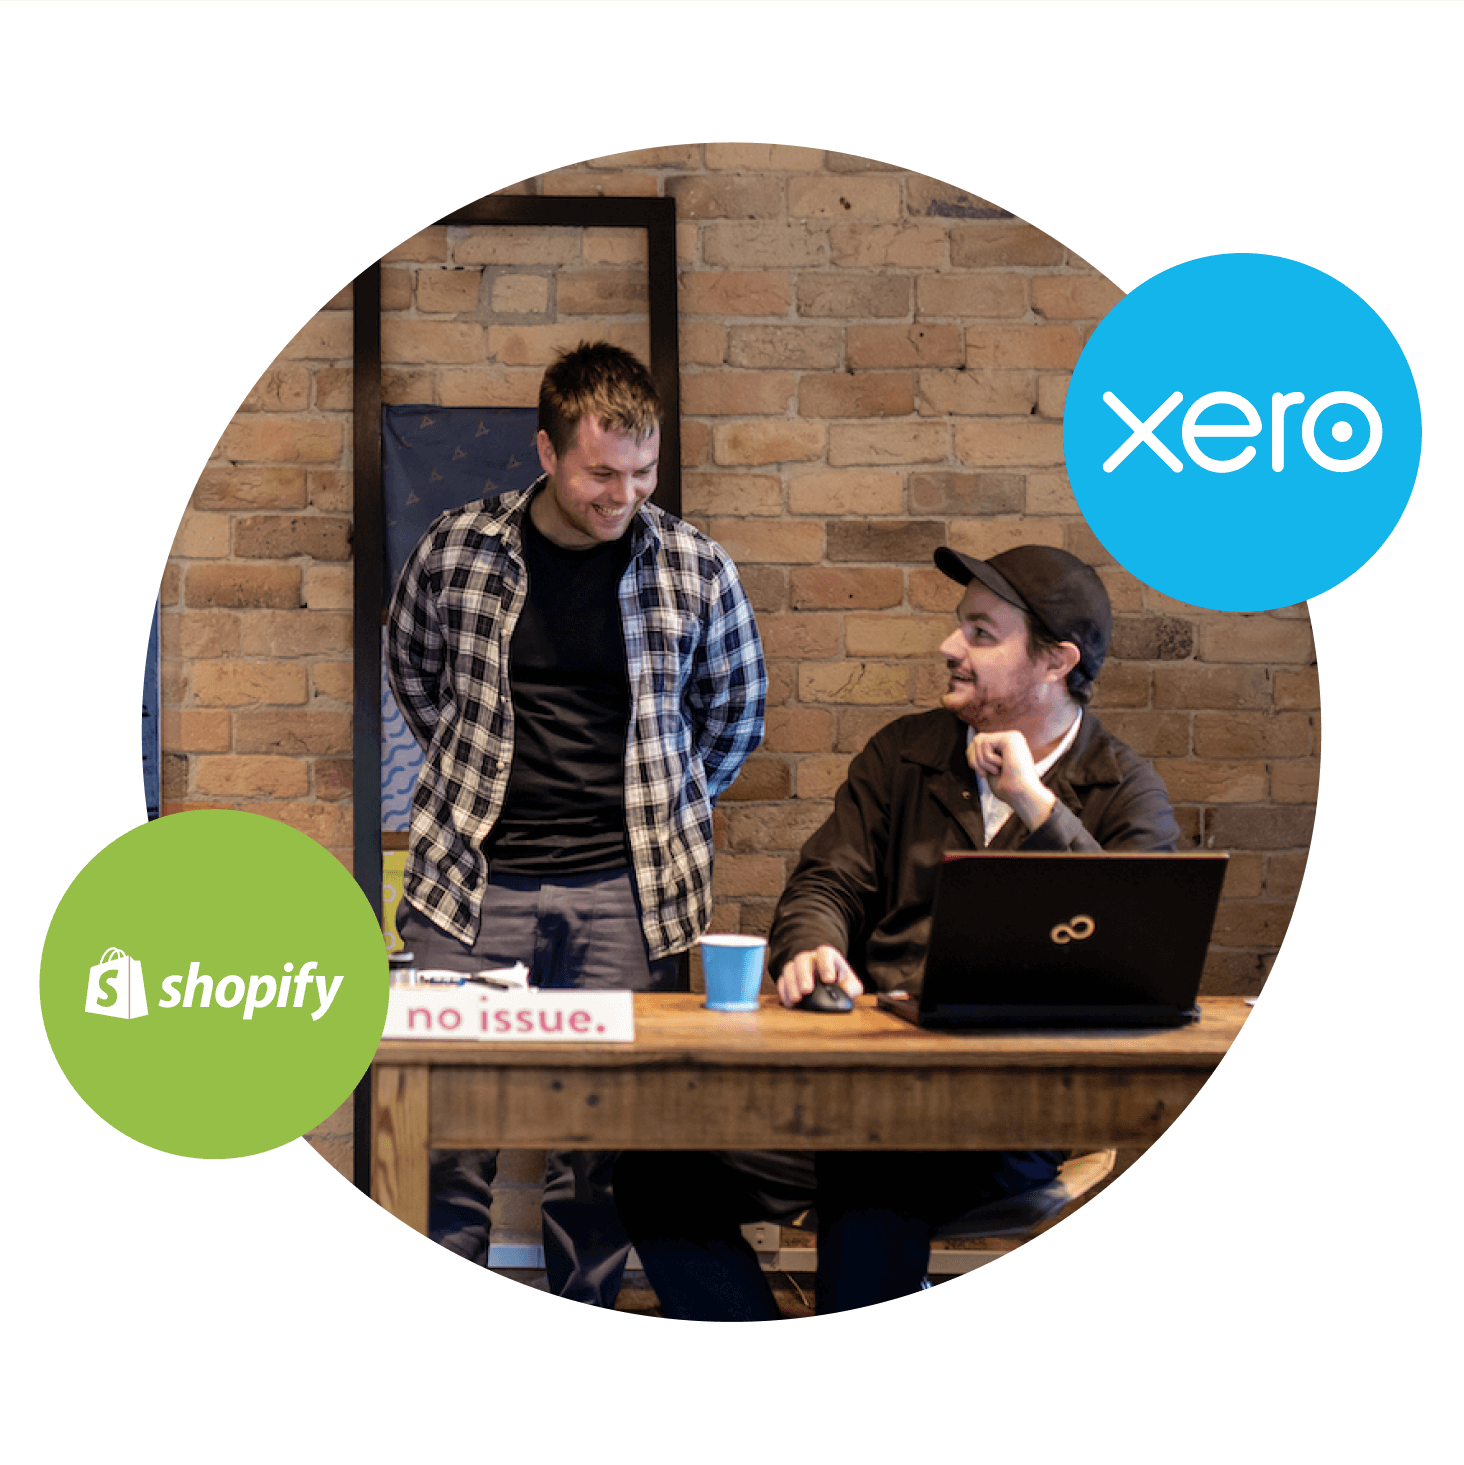 Two United Kingdom ecommerce sellers chat about the increase in sales since using Shopify and Xero for their online store.